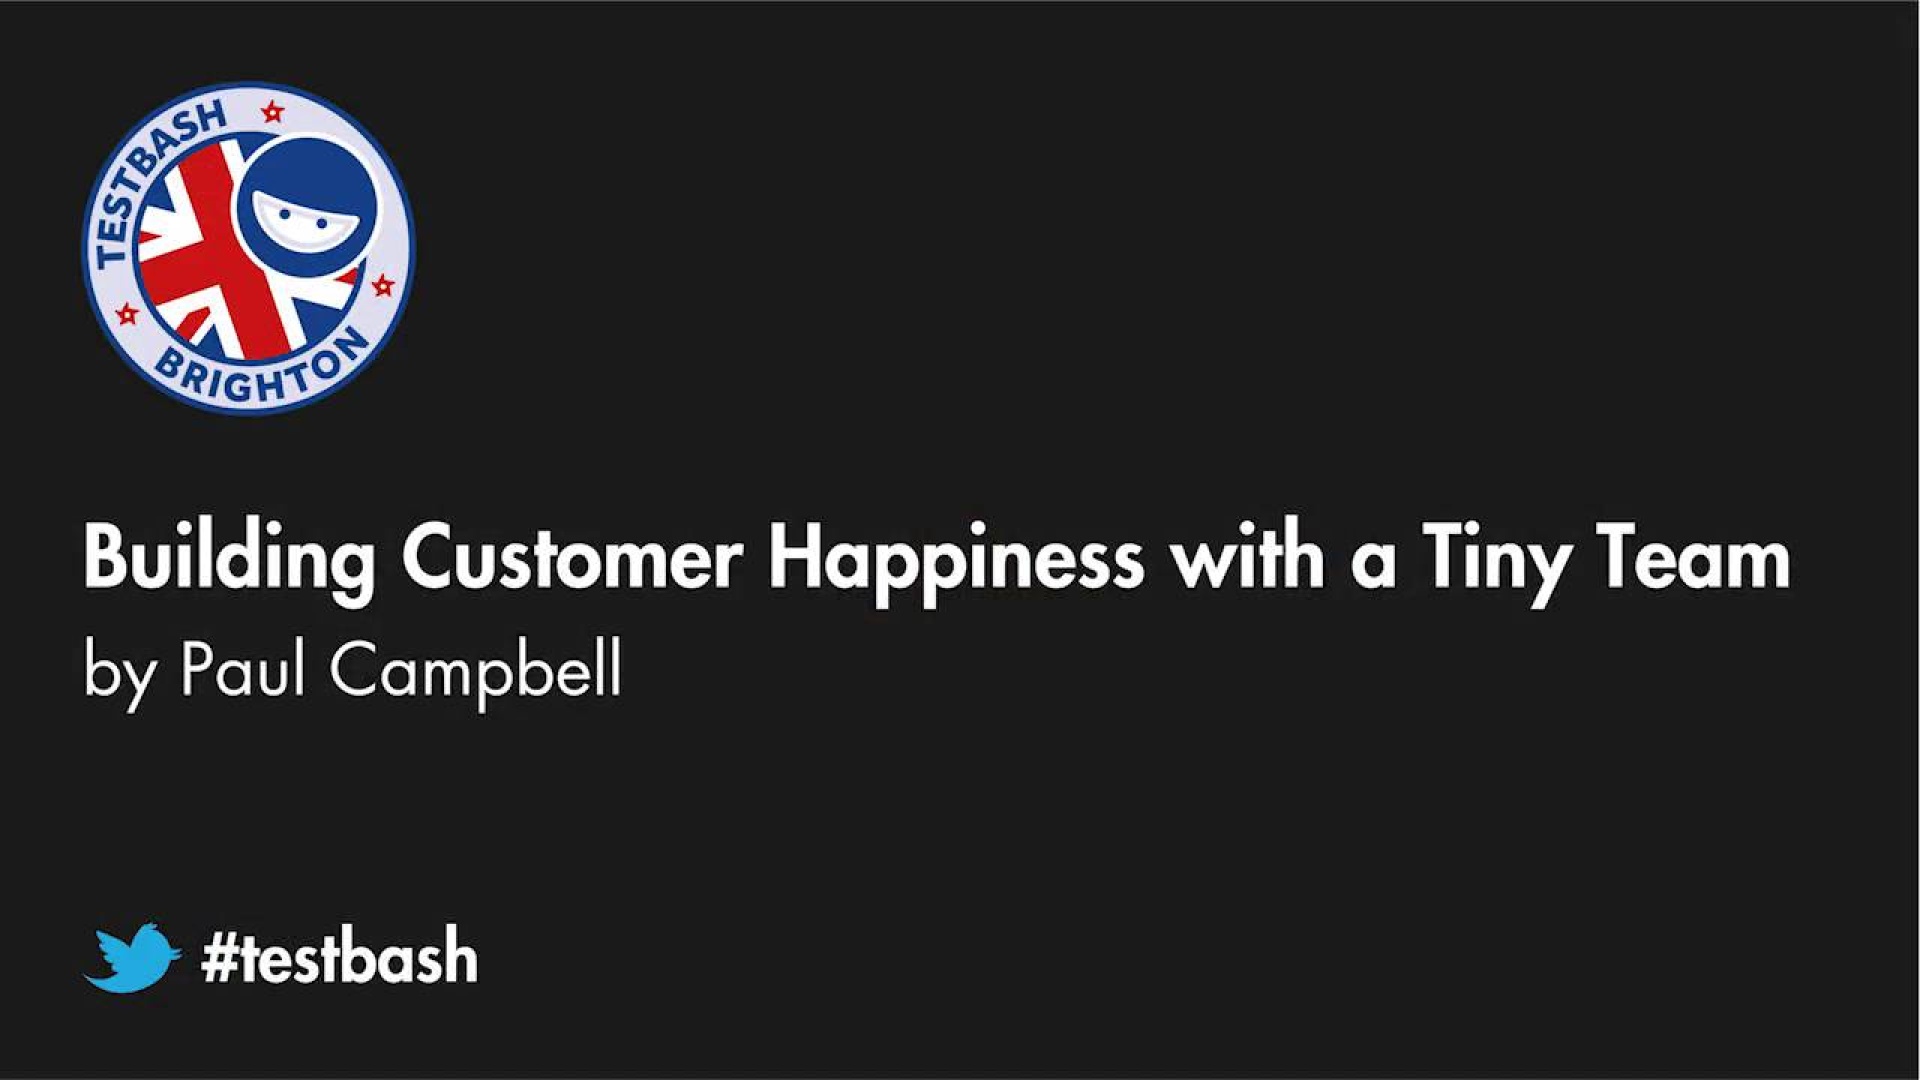 Building Customer Happiness with a Tiny Team - Paul Campbell